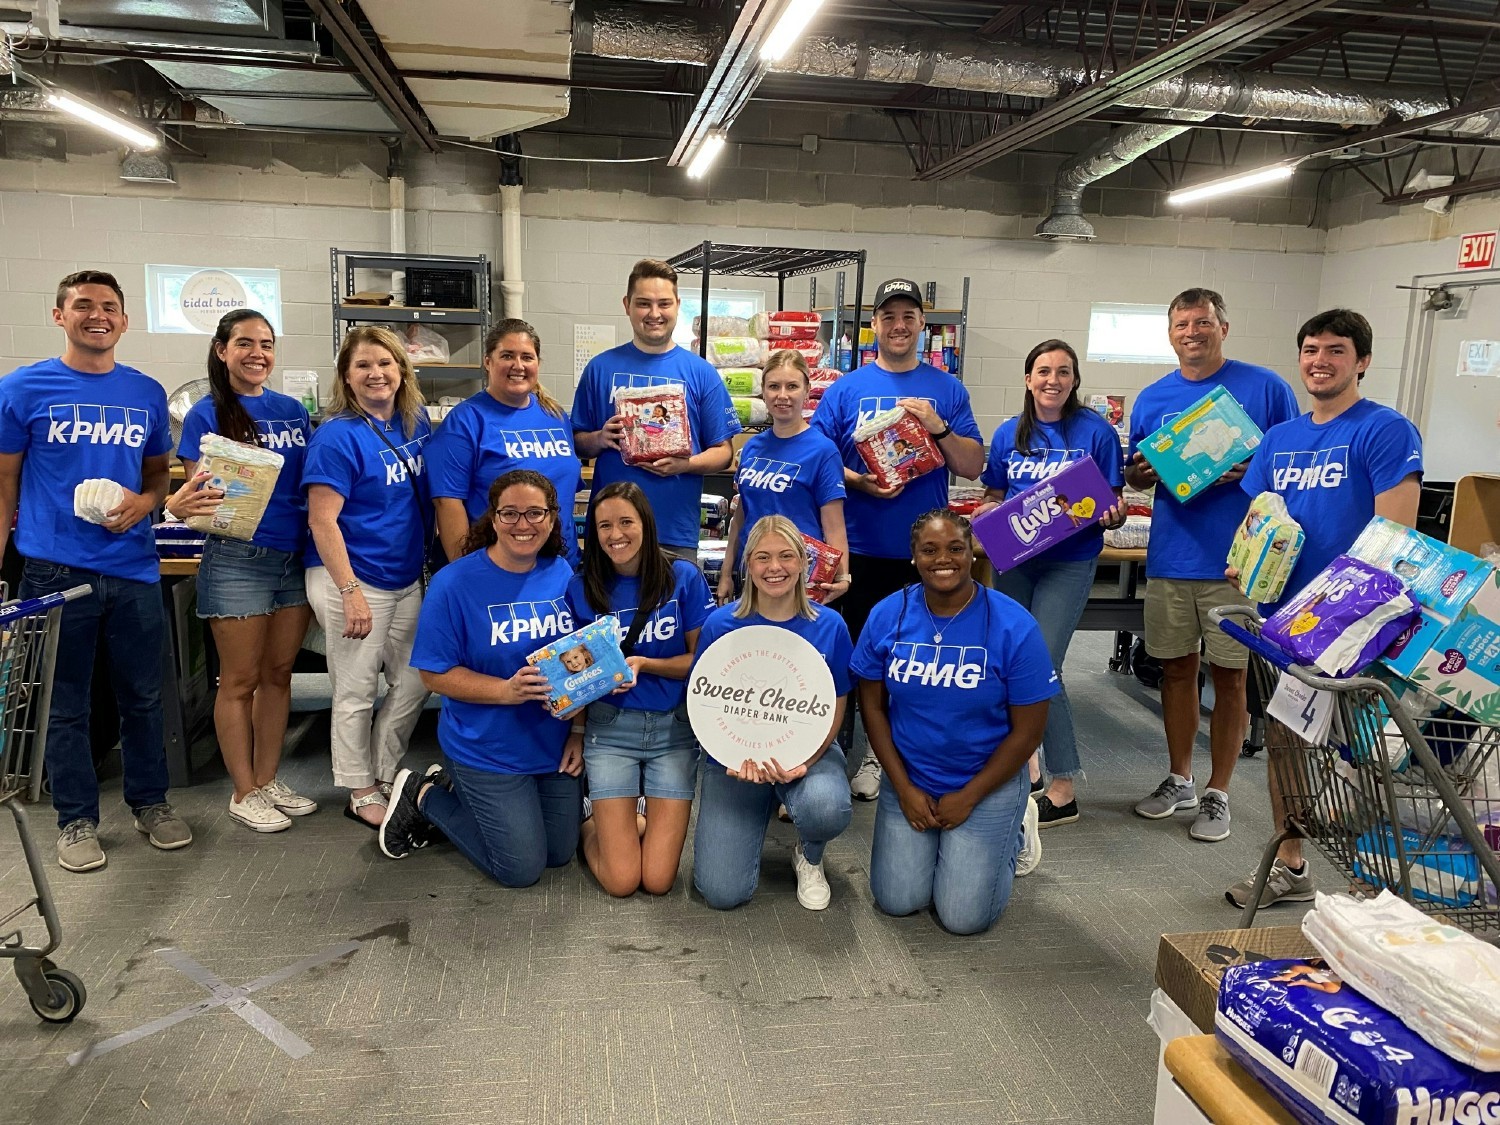 KPMG volunteers sorted and wrapped over 11,000 diapers for a Cincinnati diaper bank during KPMG's Community Impact Day. 